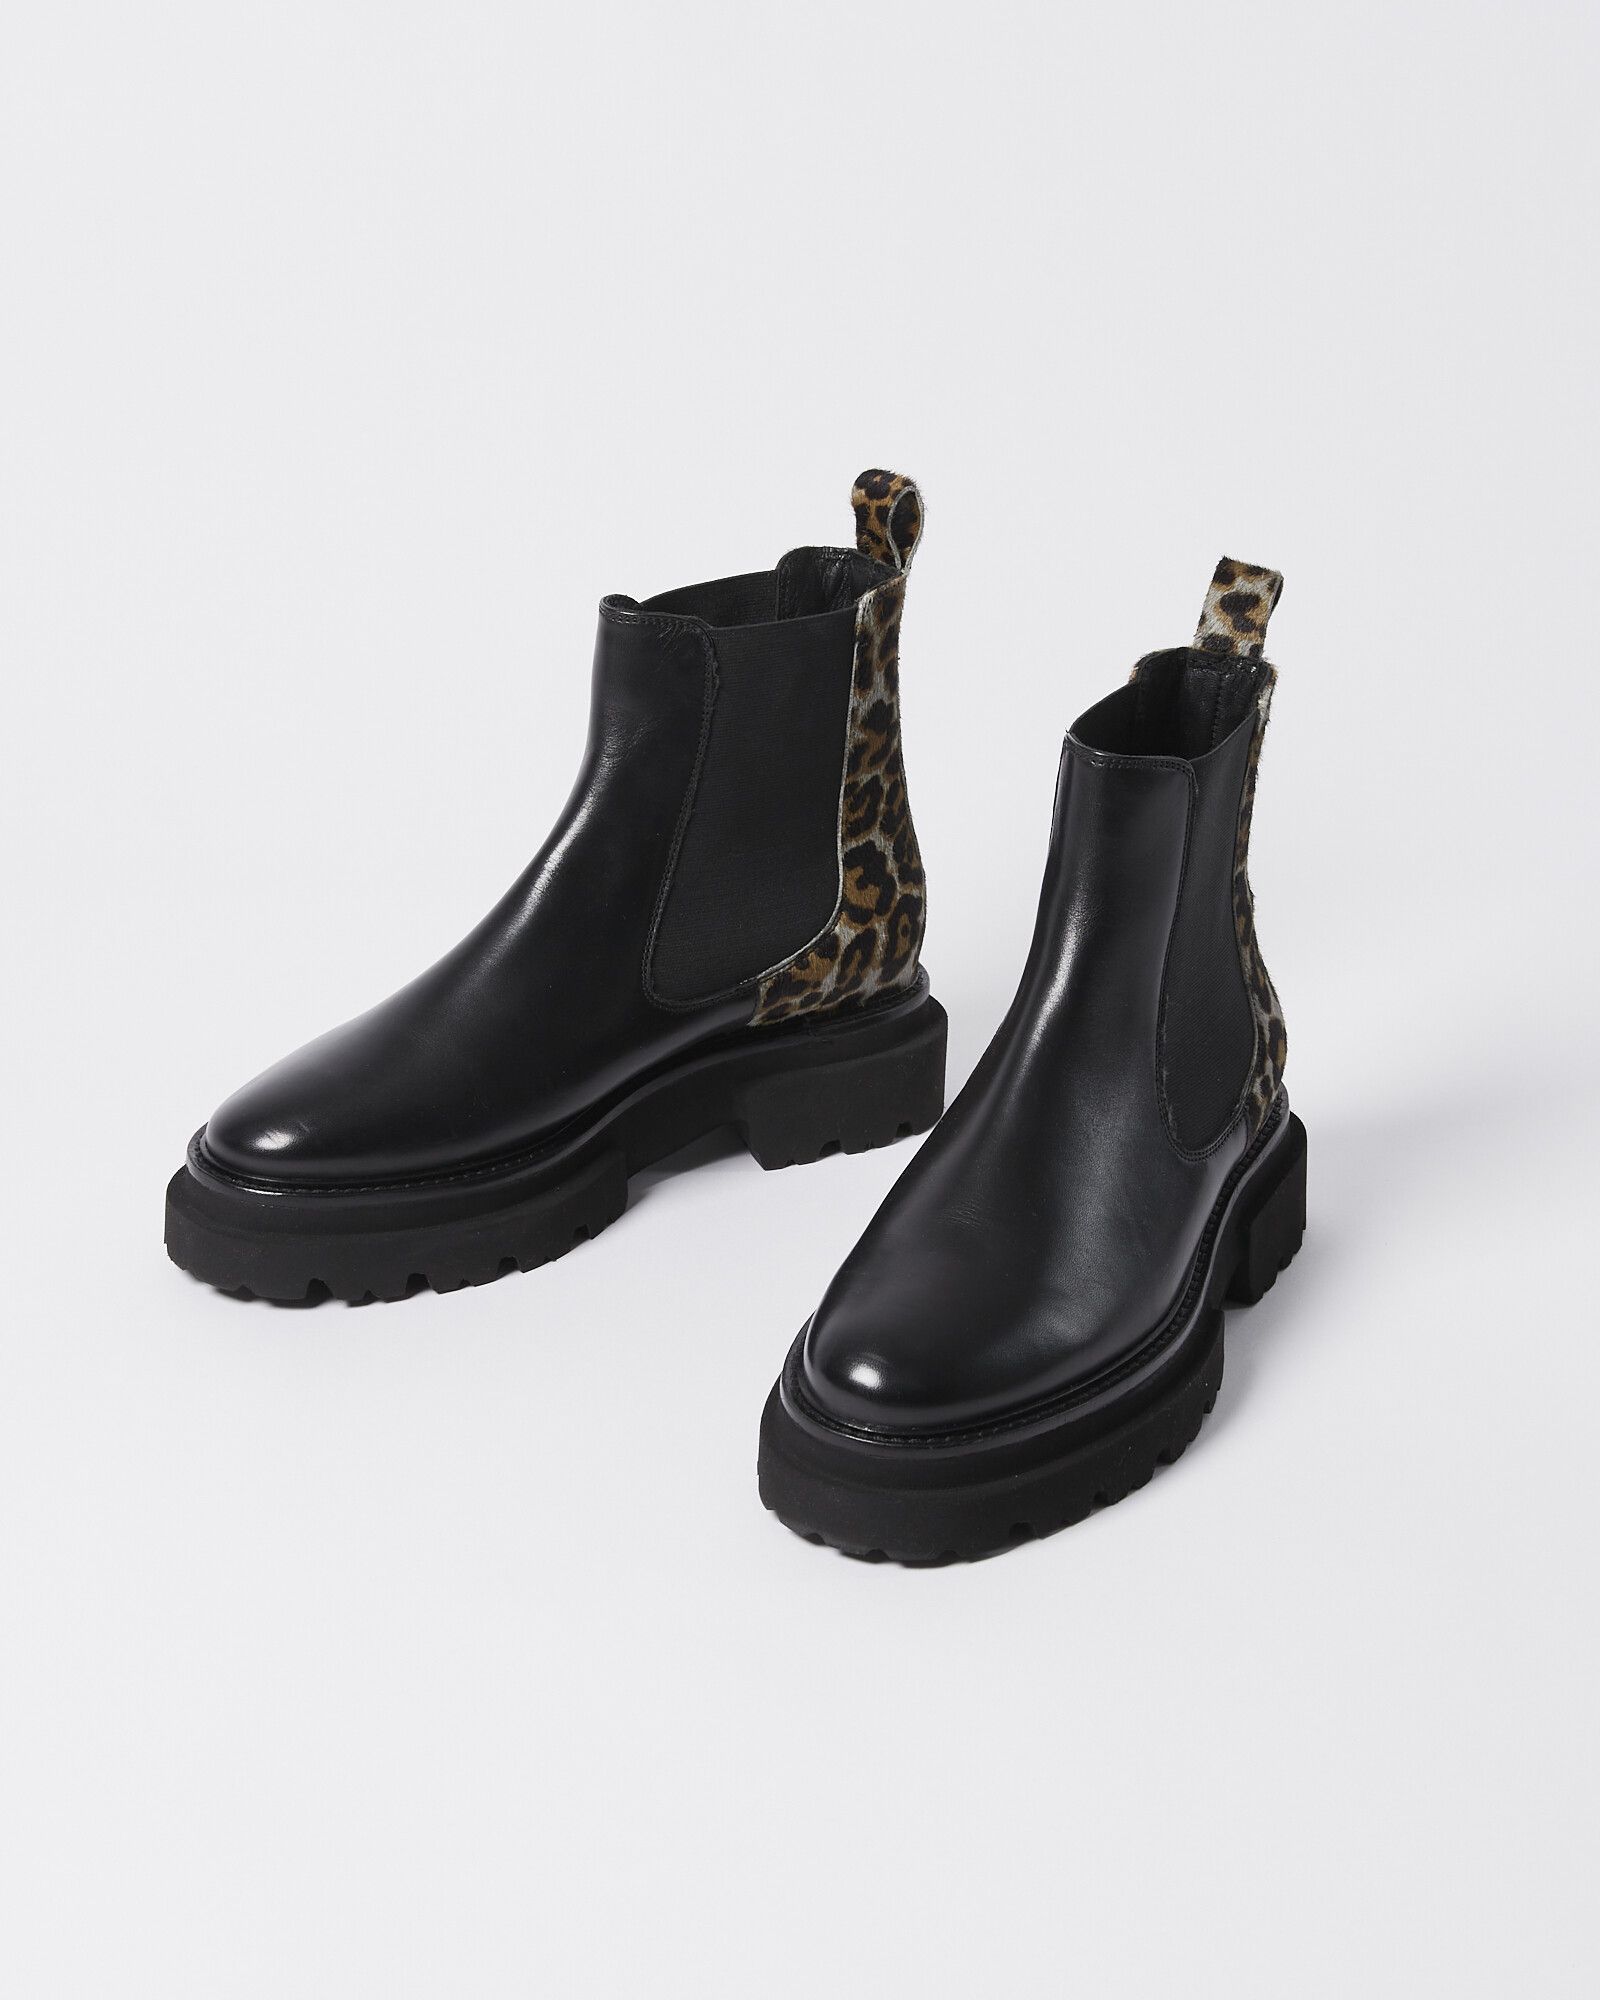 Textured Leopard Print & Black Leather Chunky Ankle Boots | Oliver Bonas